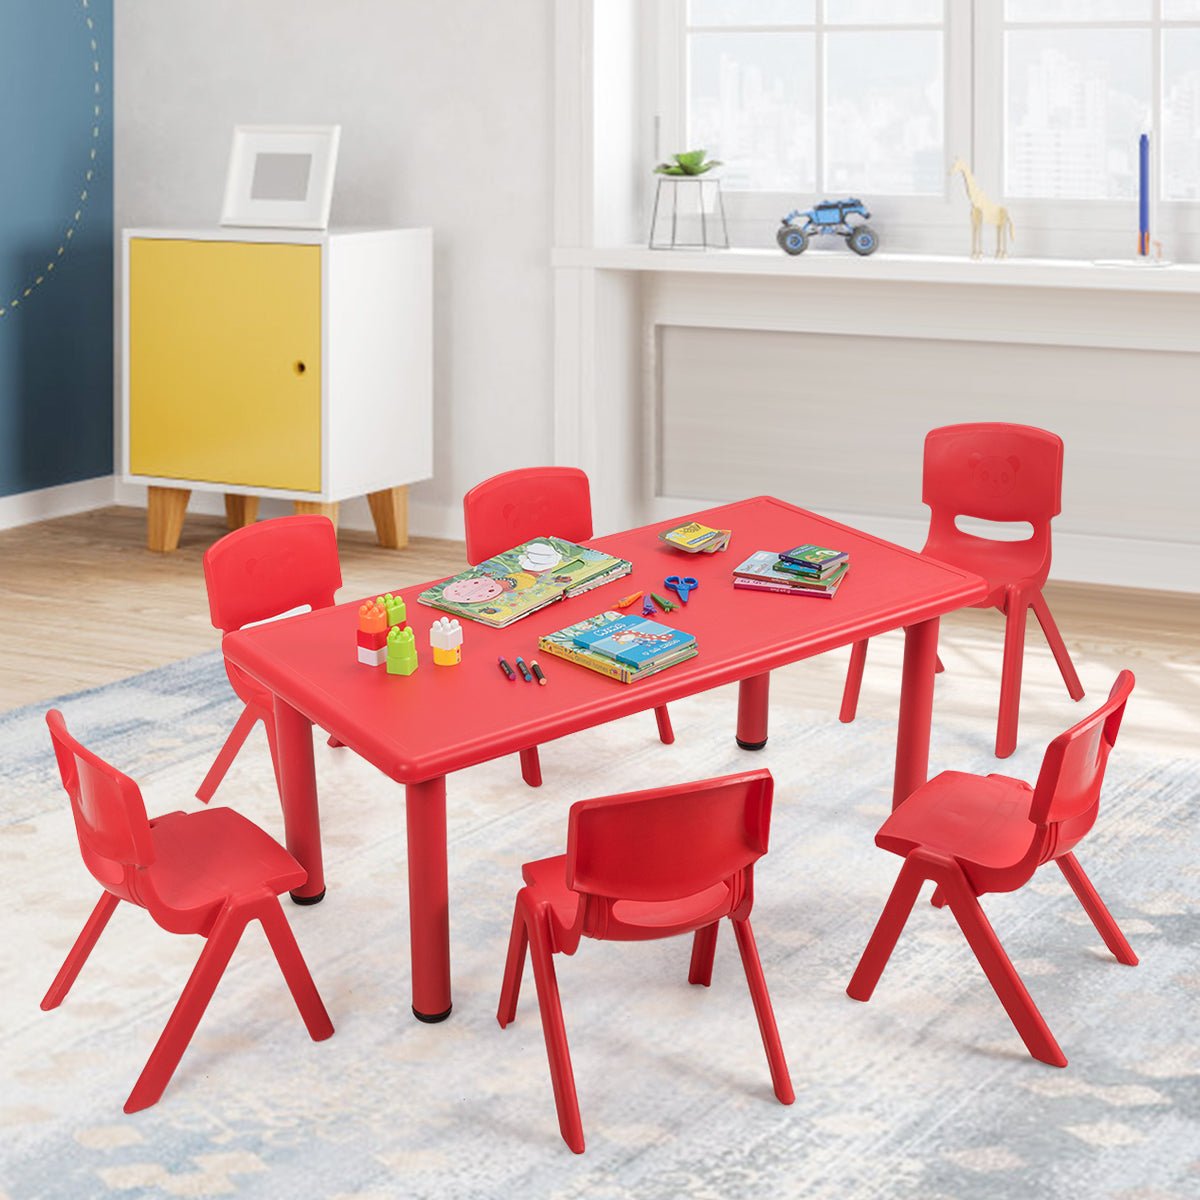 Kids Table and 6 Chairs Set - Nurturing Growth at Preschool and Home